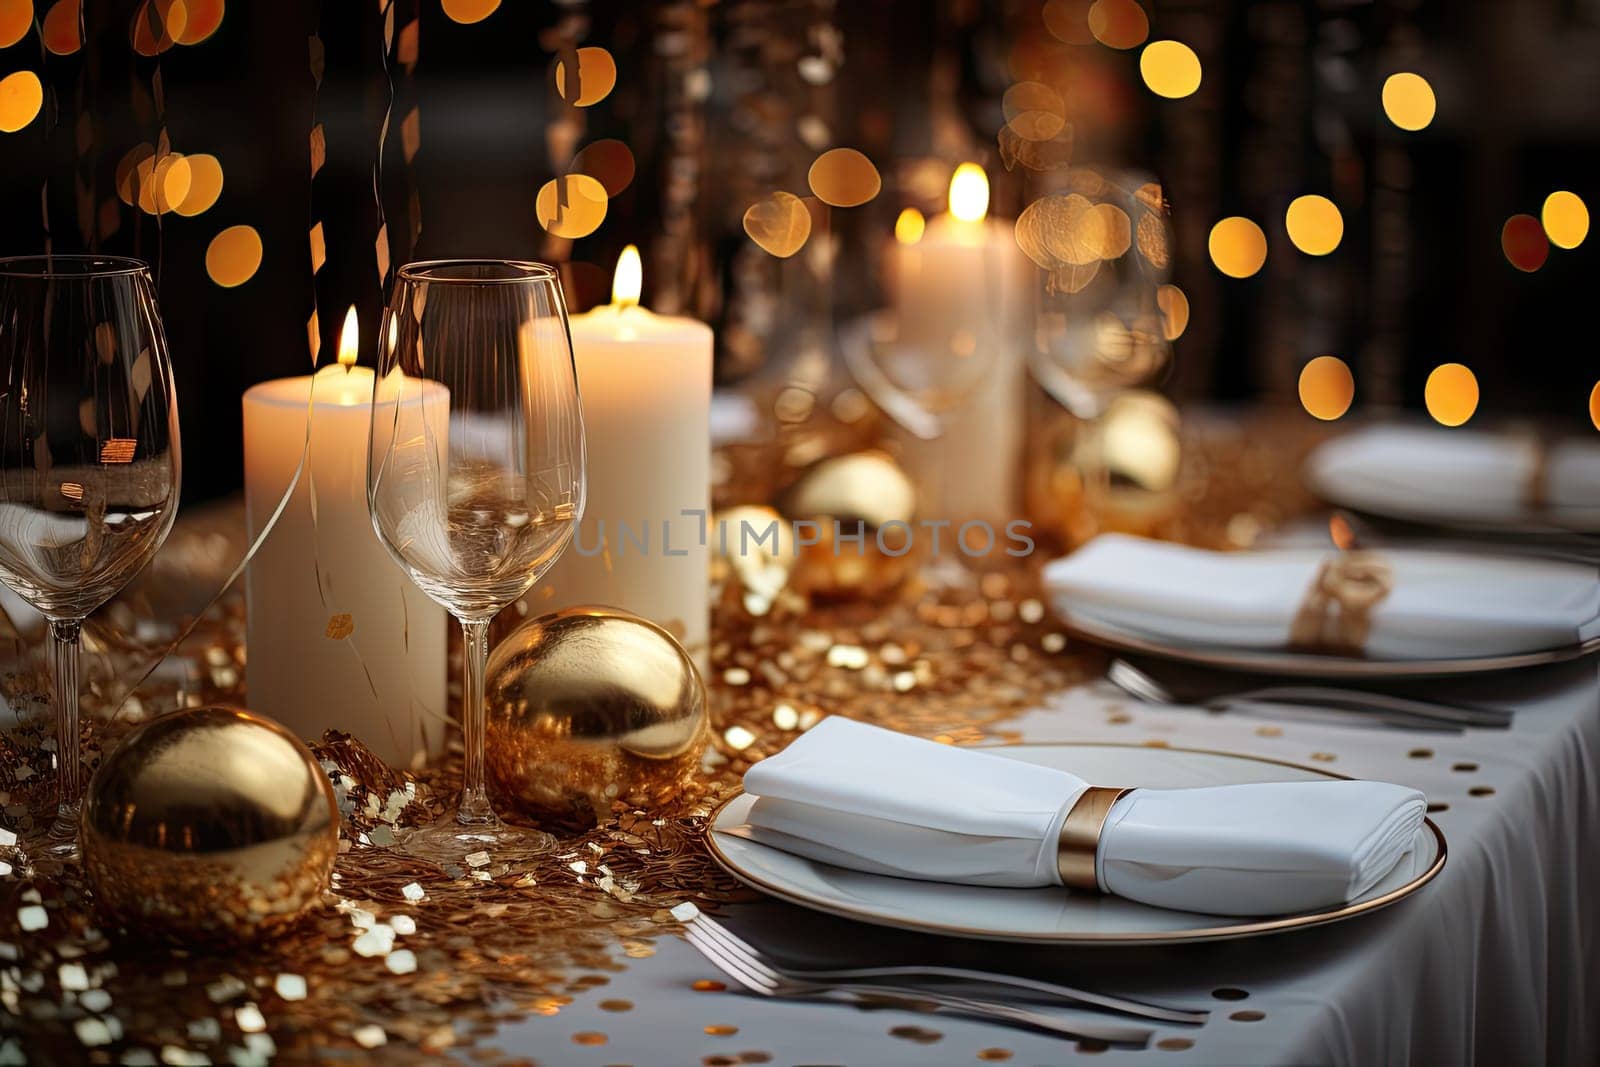 A table topped with lots of candles and plates by golibtolibov